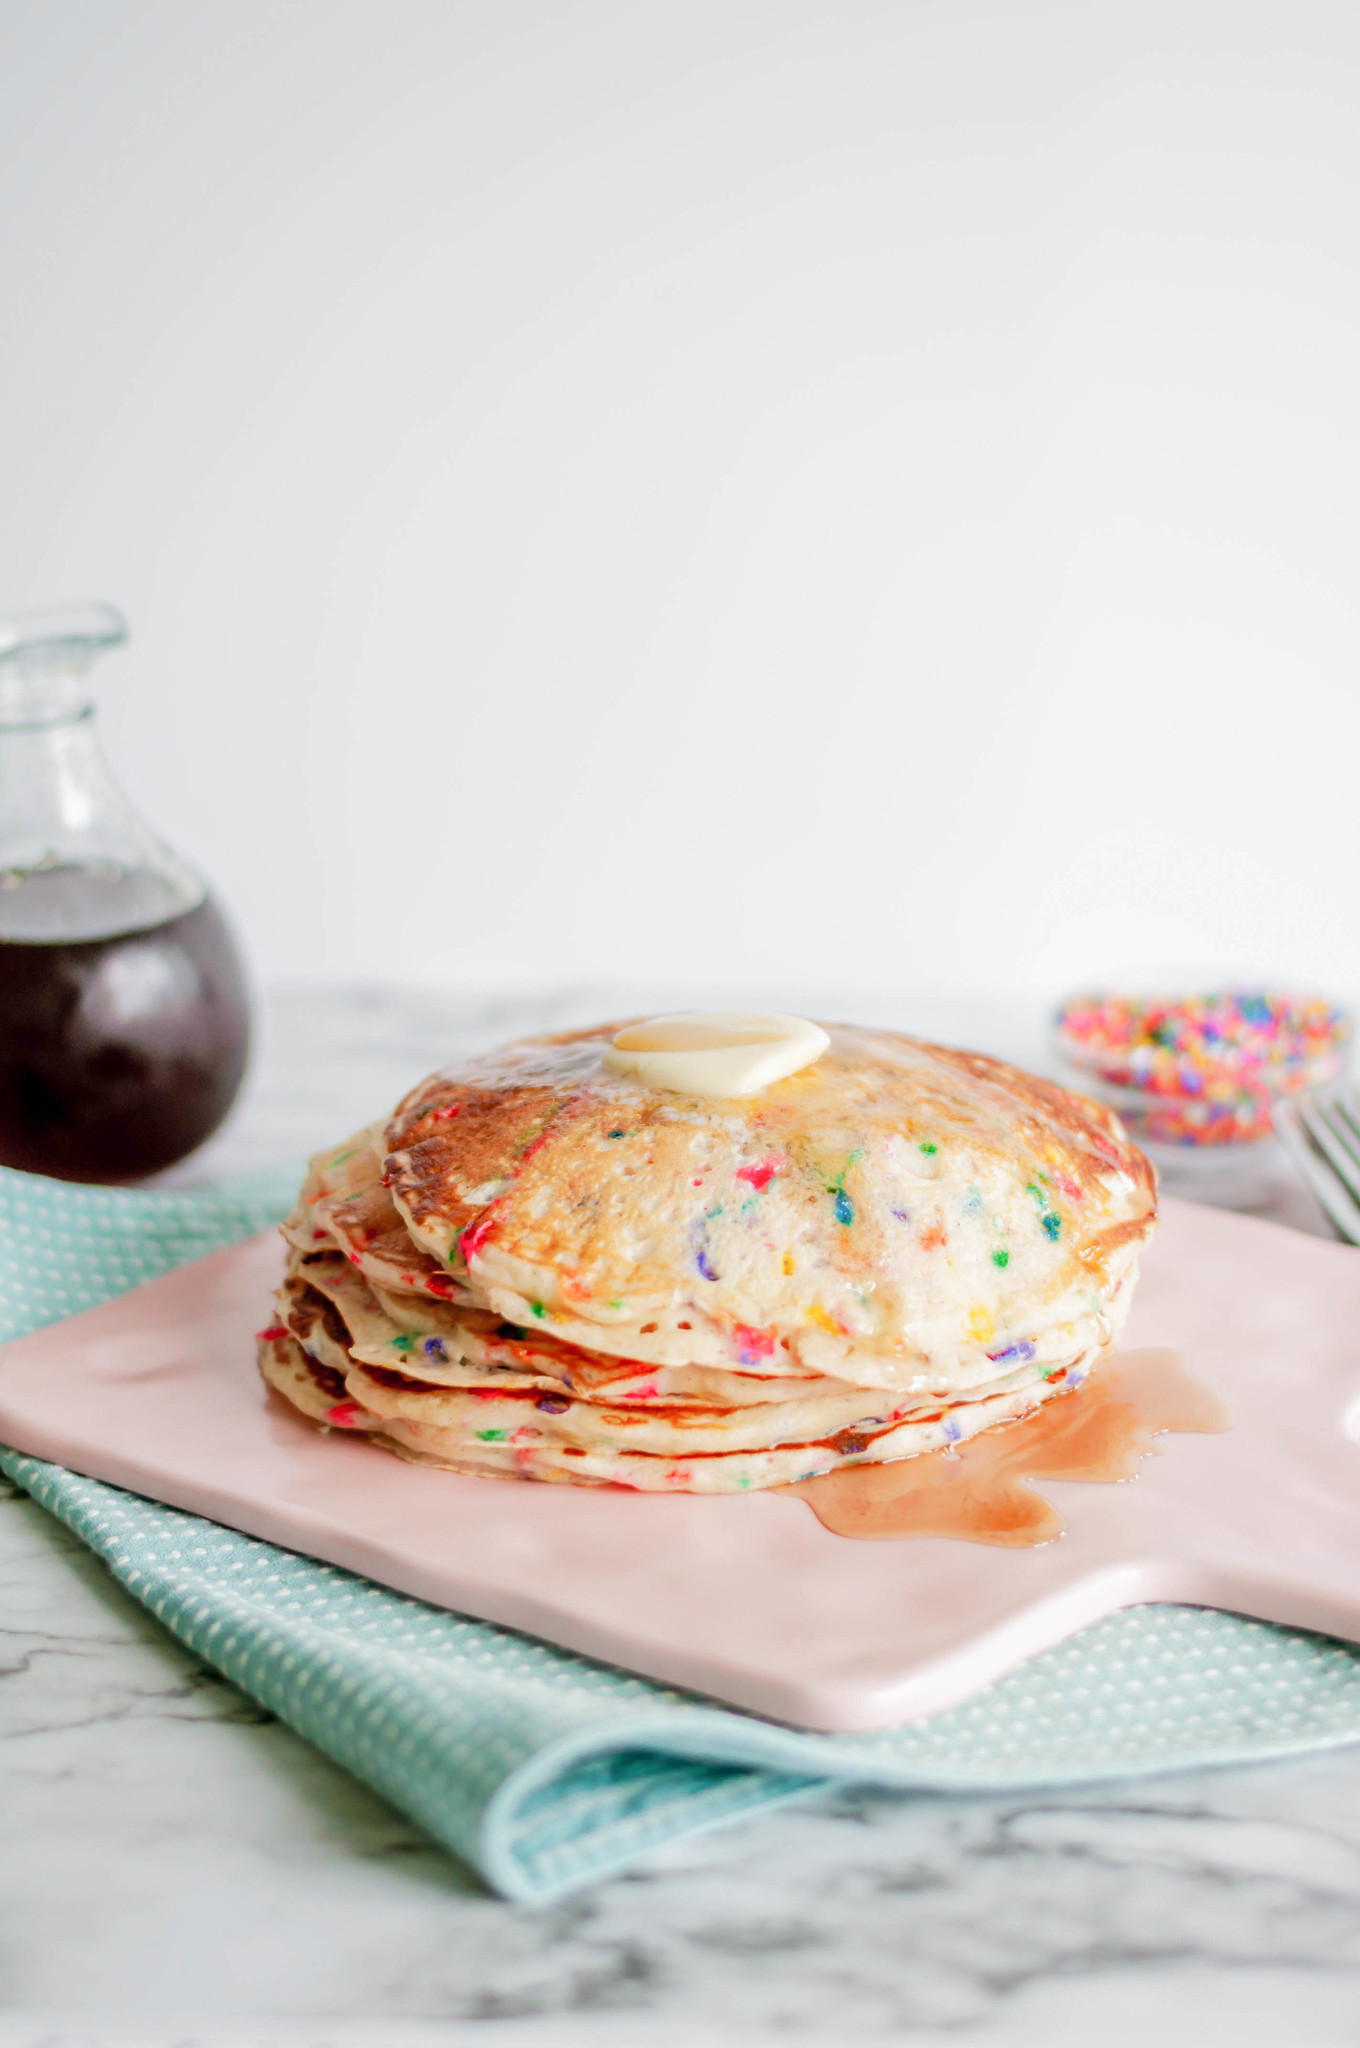 Funfetti Pancakes are a fun way to celebrate something special or brighten that Monday mood. Packed full of sprinkles and cake batter goodness.